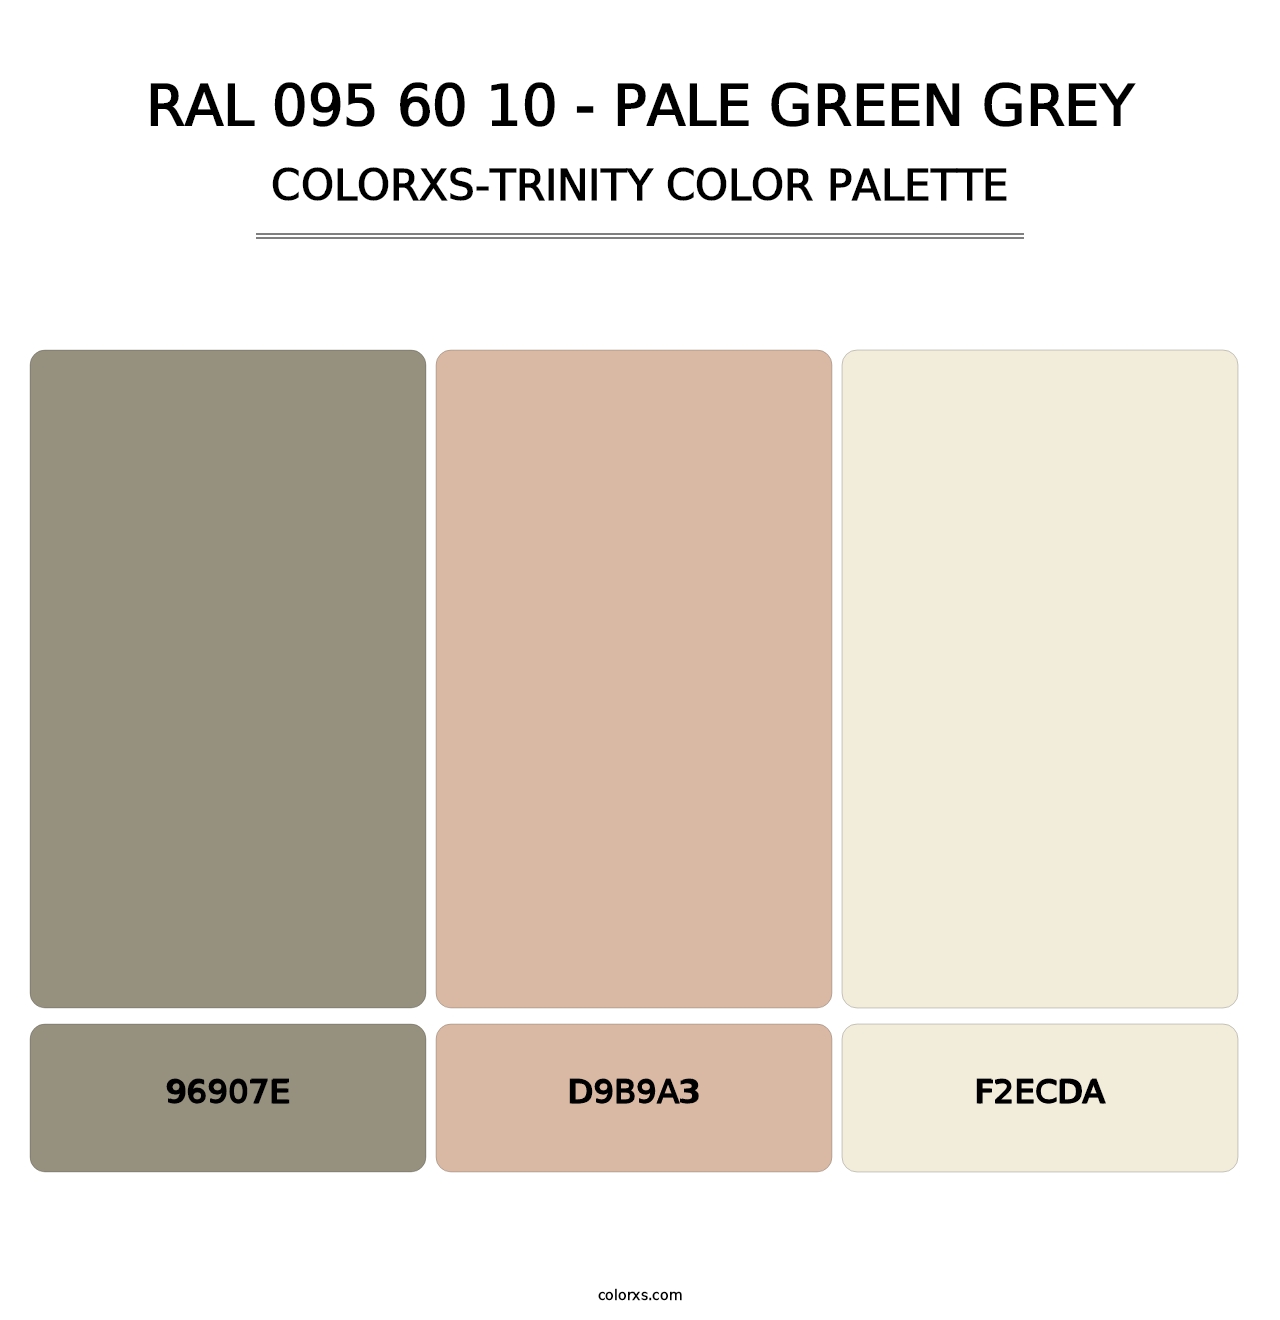 RAL 095 60 10 - Pale Green Grey - Colorxs Trinity Palette